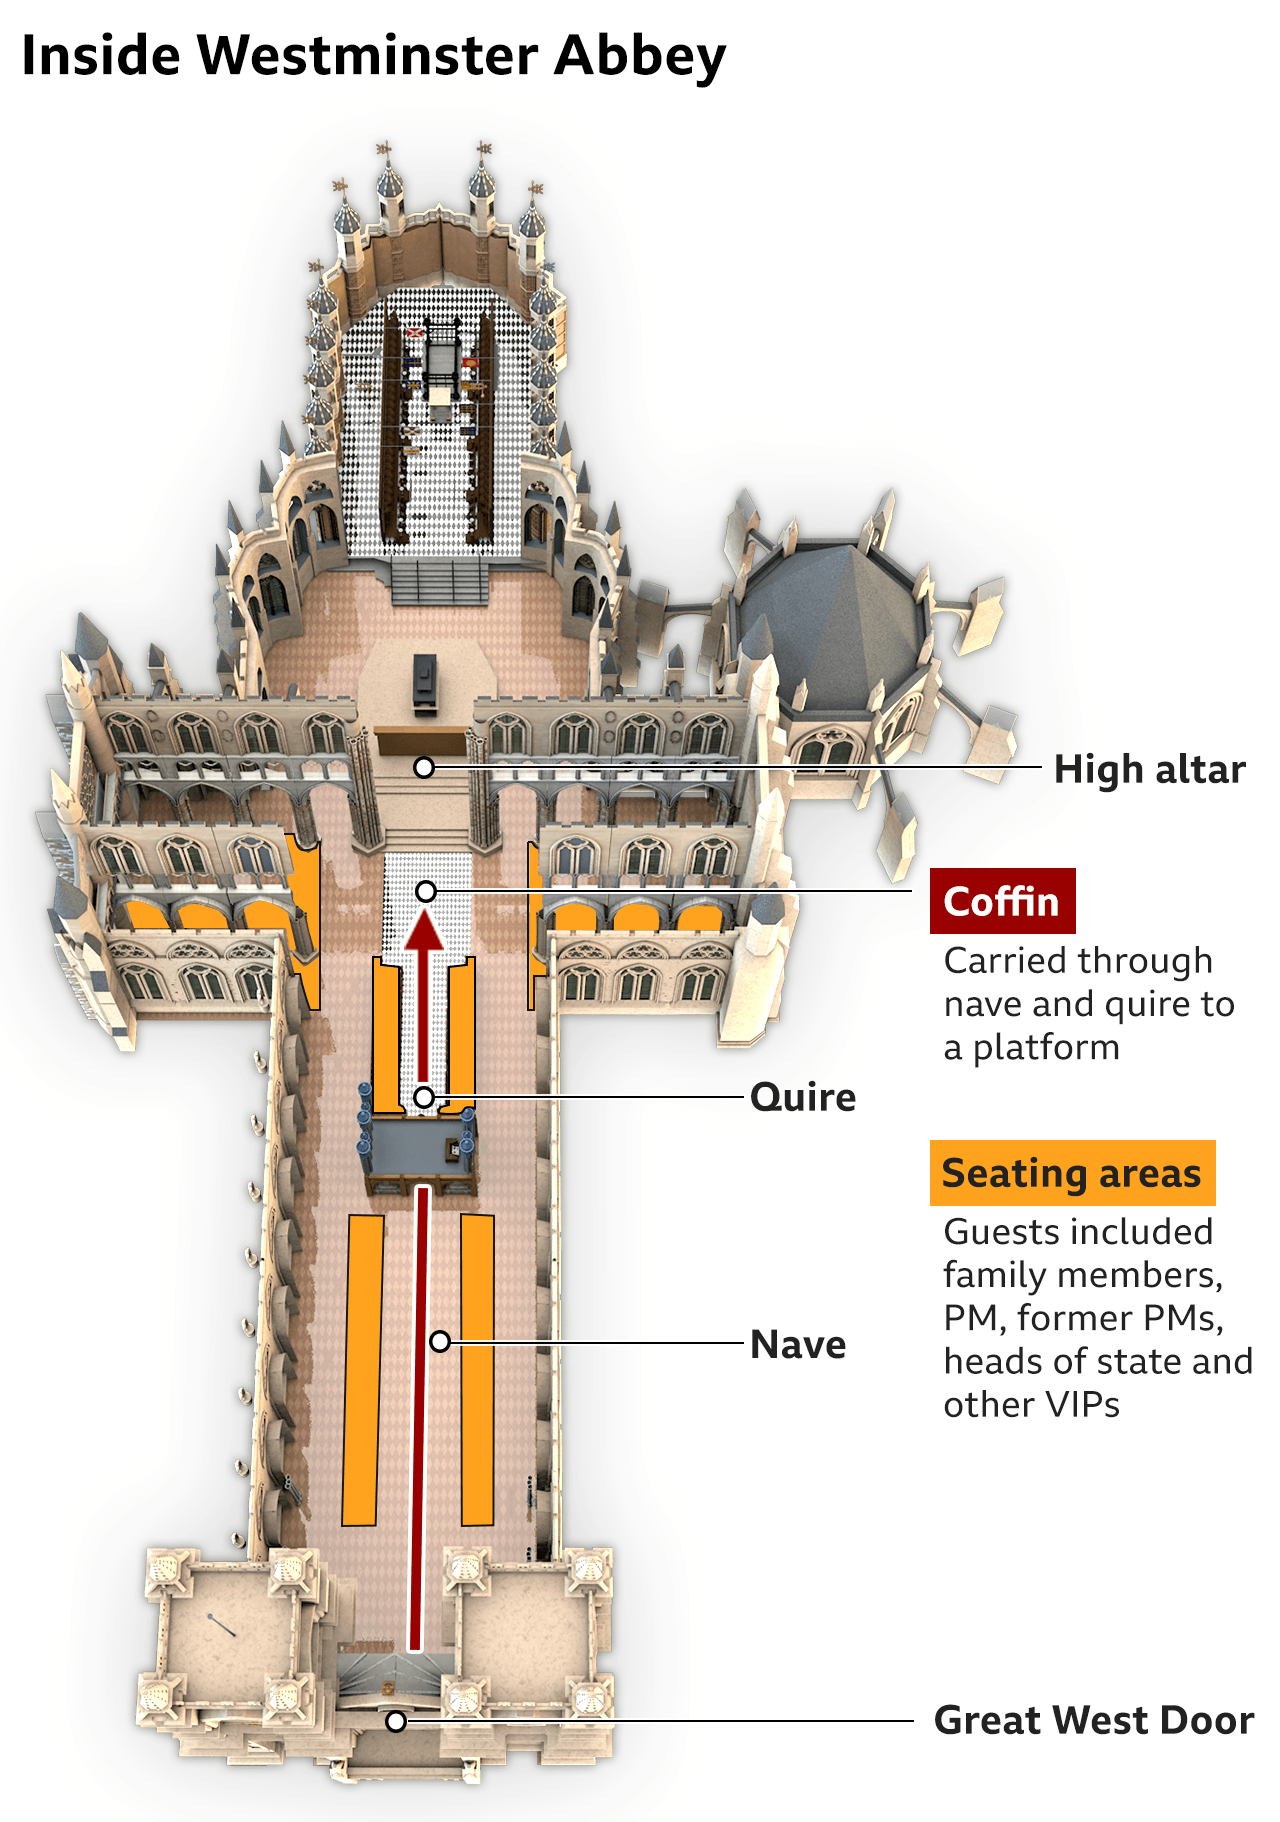 Graphic showing the interior of Westminster Abbey